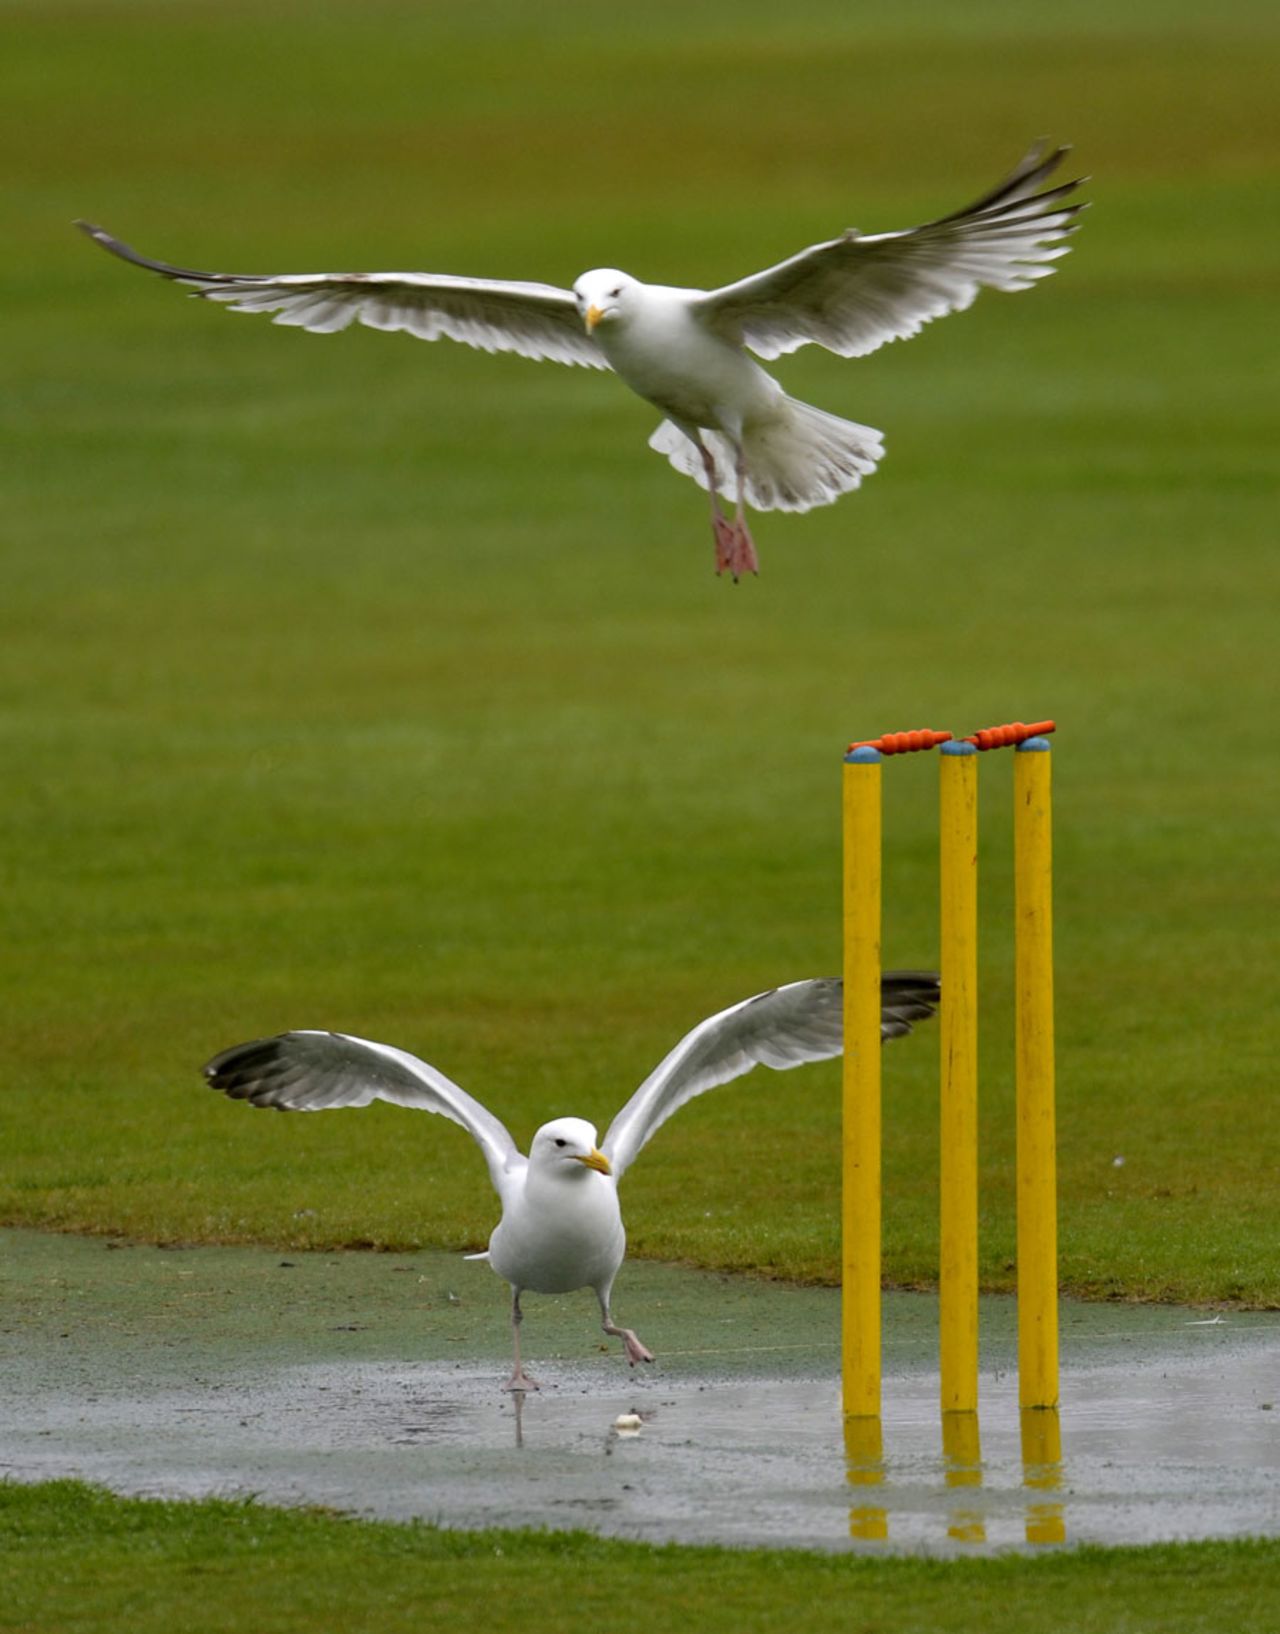 Rain ensured birds queered the pitch, Scotland v Netherlands, 2nd day, ICC Intercontinental Cup, Aberdeen, June 22, 2011